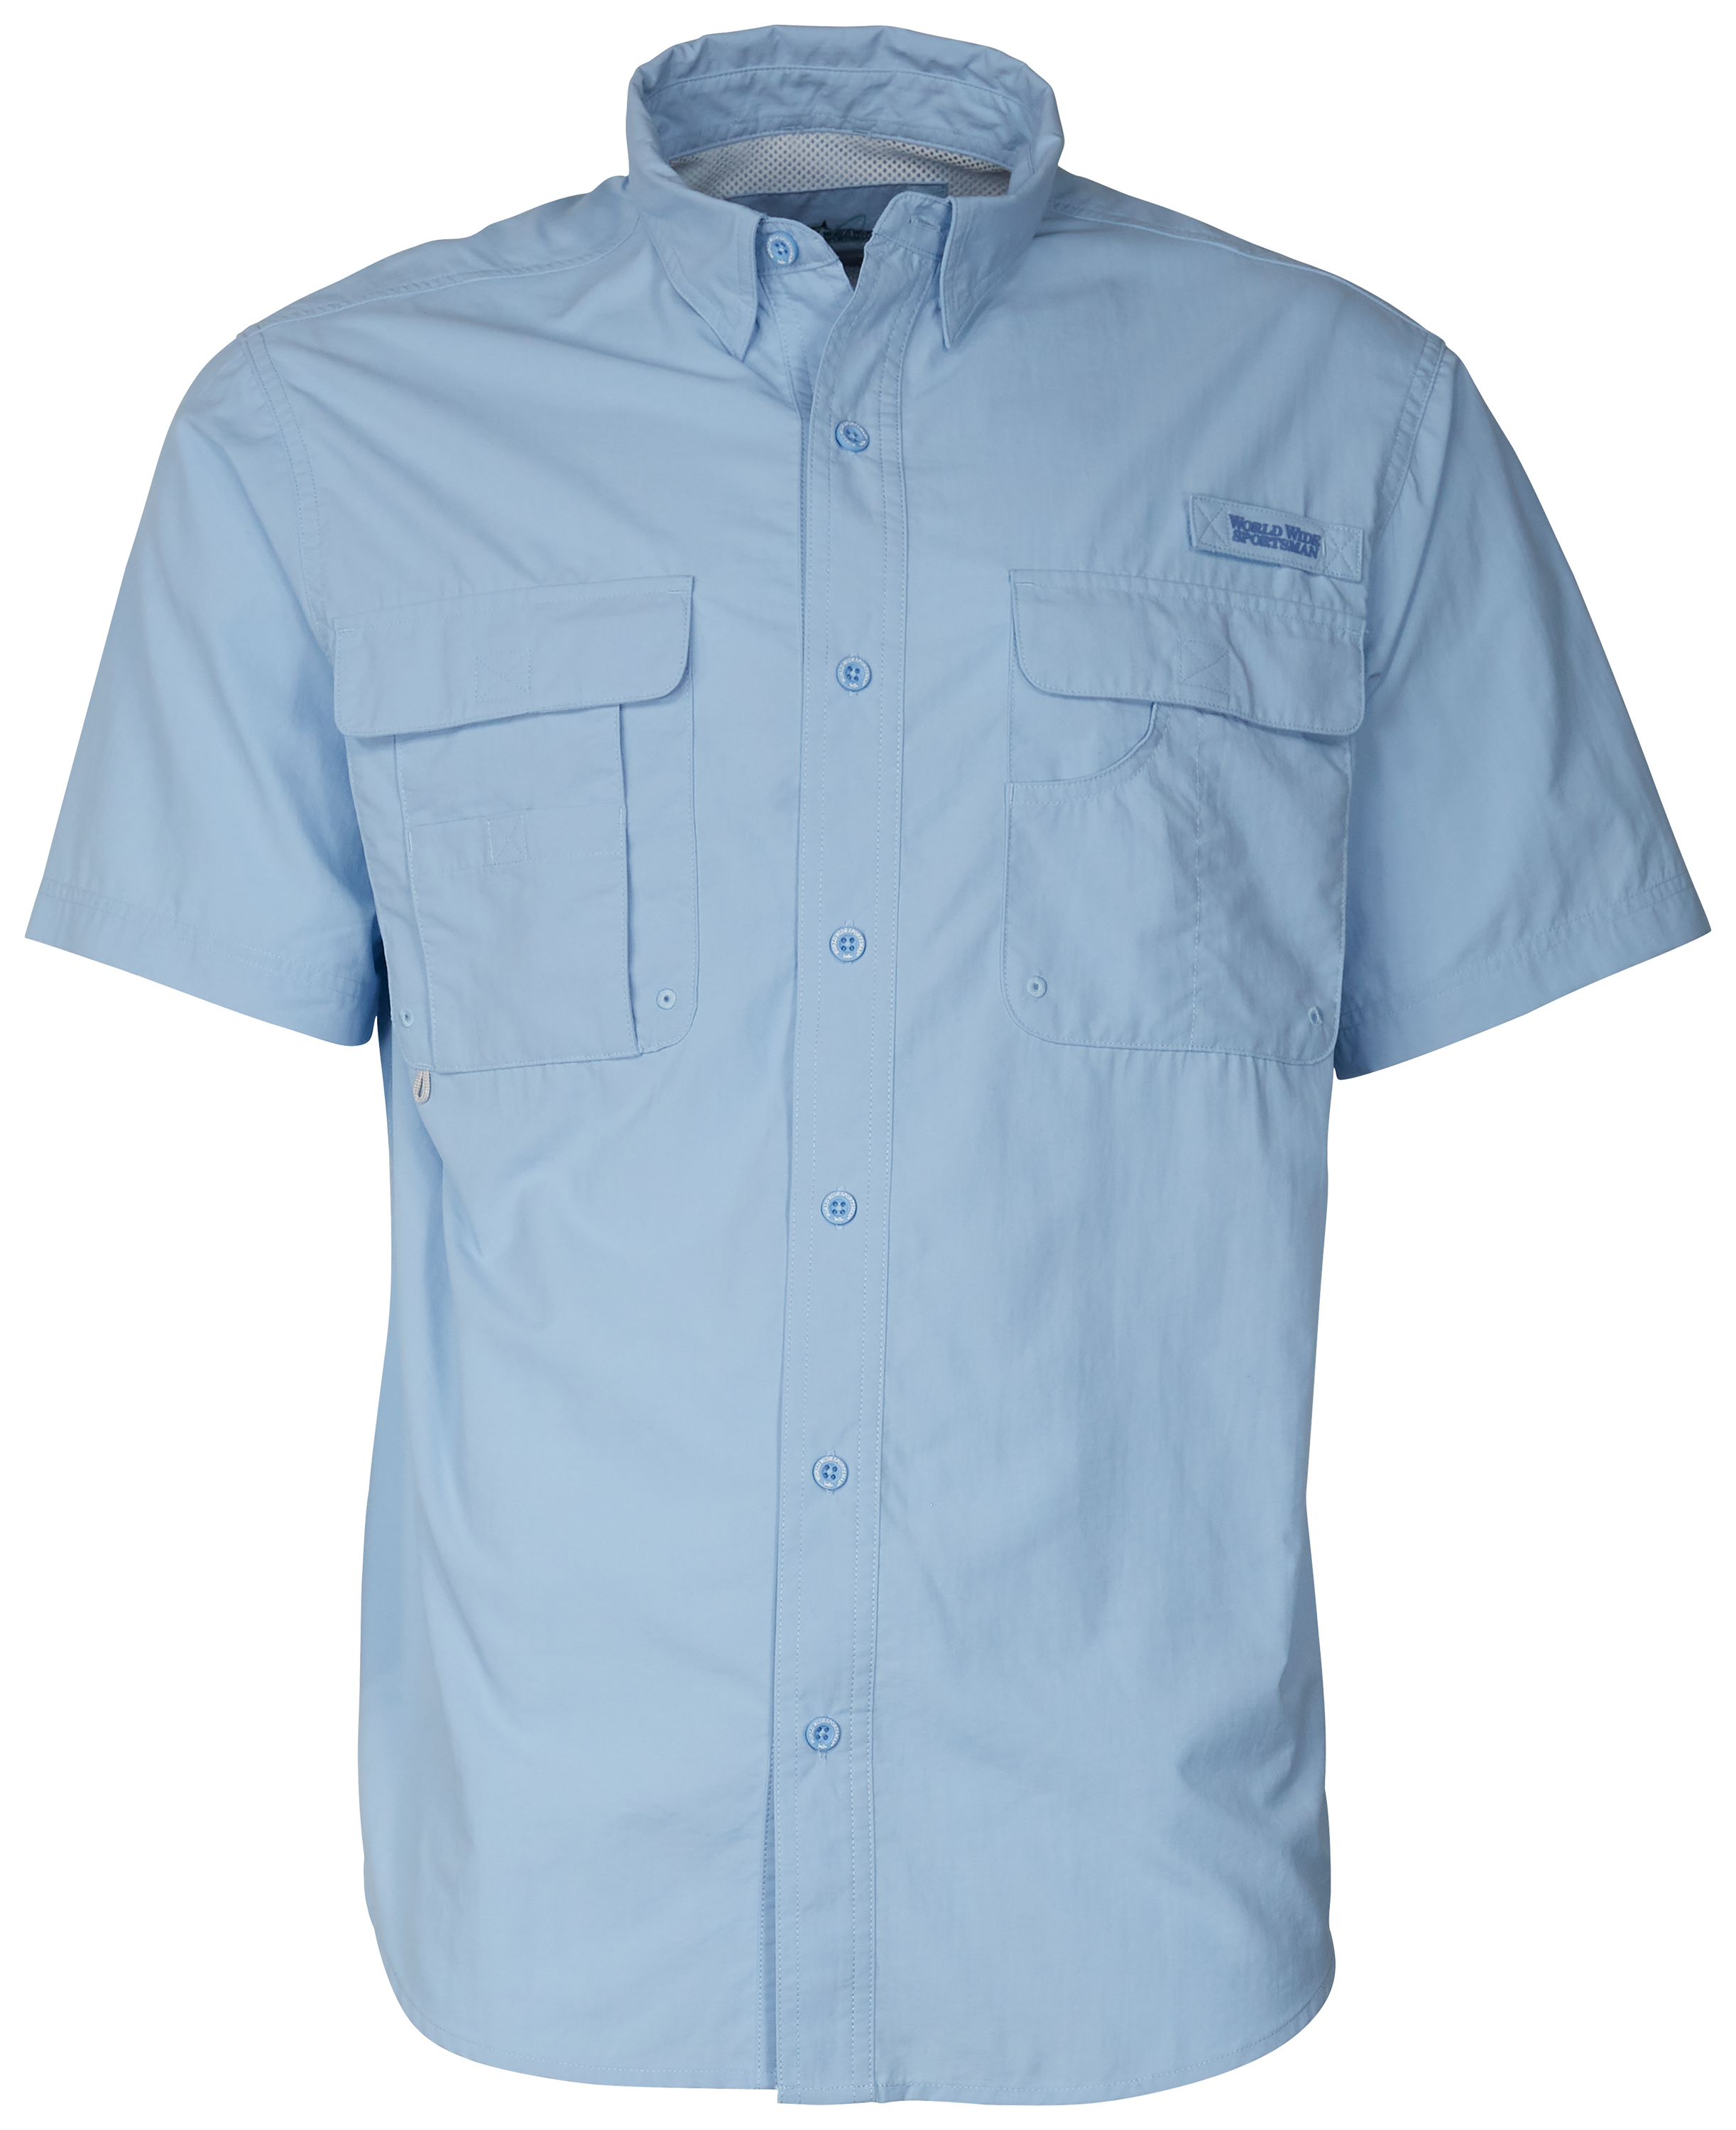 World Wide Sportsman Recycled-Nylon Angler 2.0 Short-Sleeve Button-Down Shirt for Men - Placid Blue - 3XL